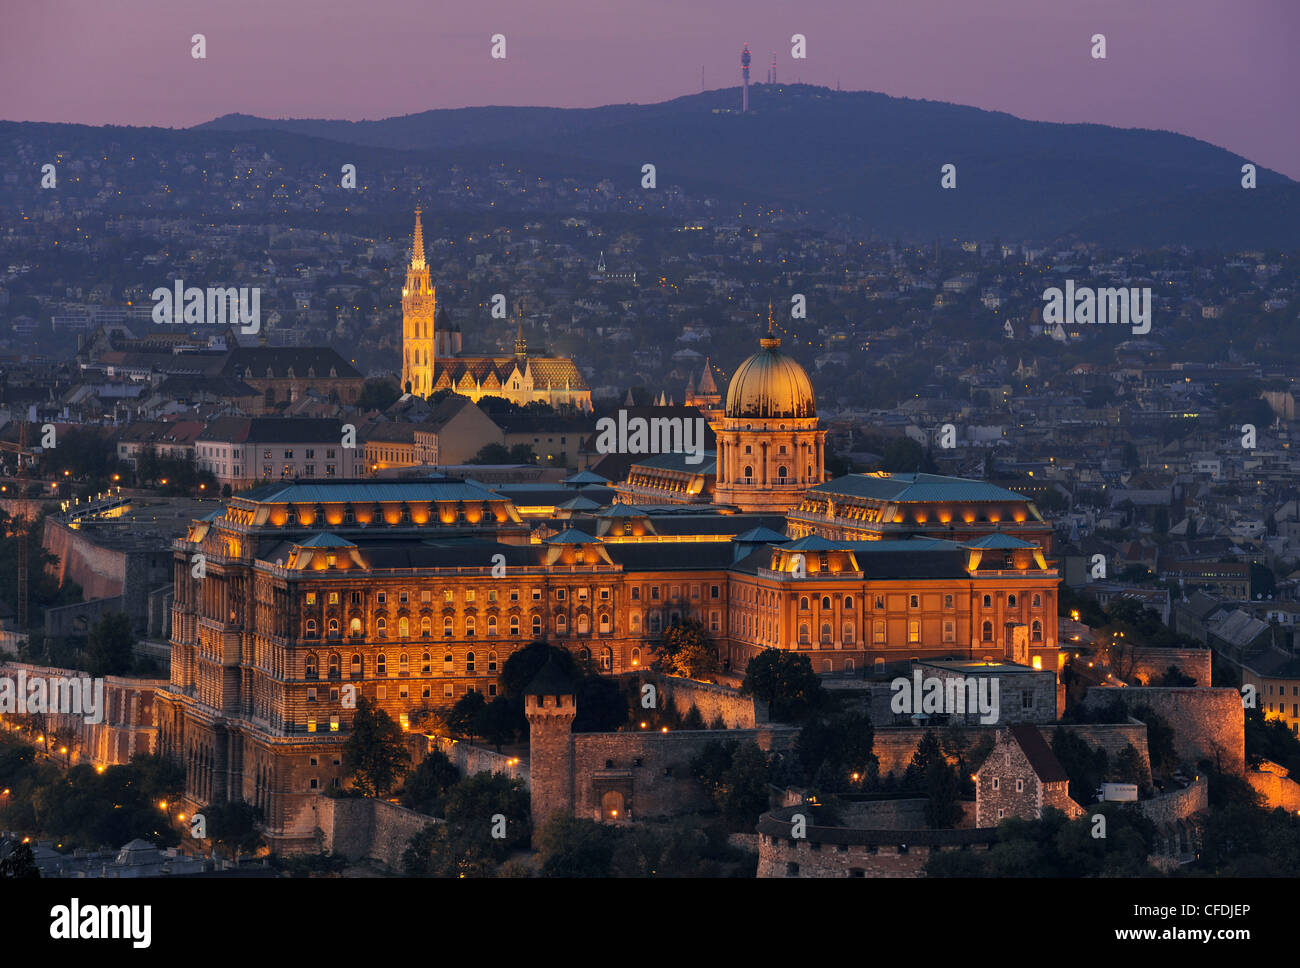 Castle hill with illuminated castle in the evening, Budapest, Hungary, Europe Stock Photo